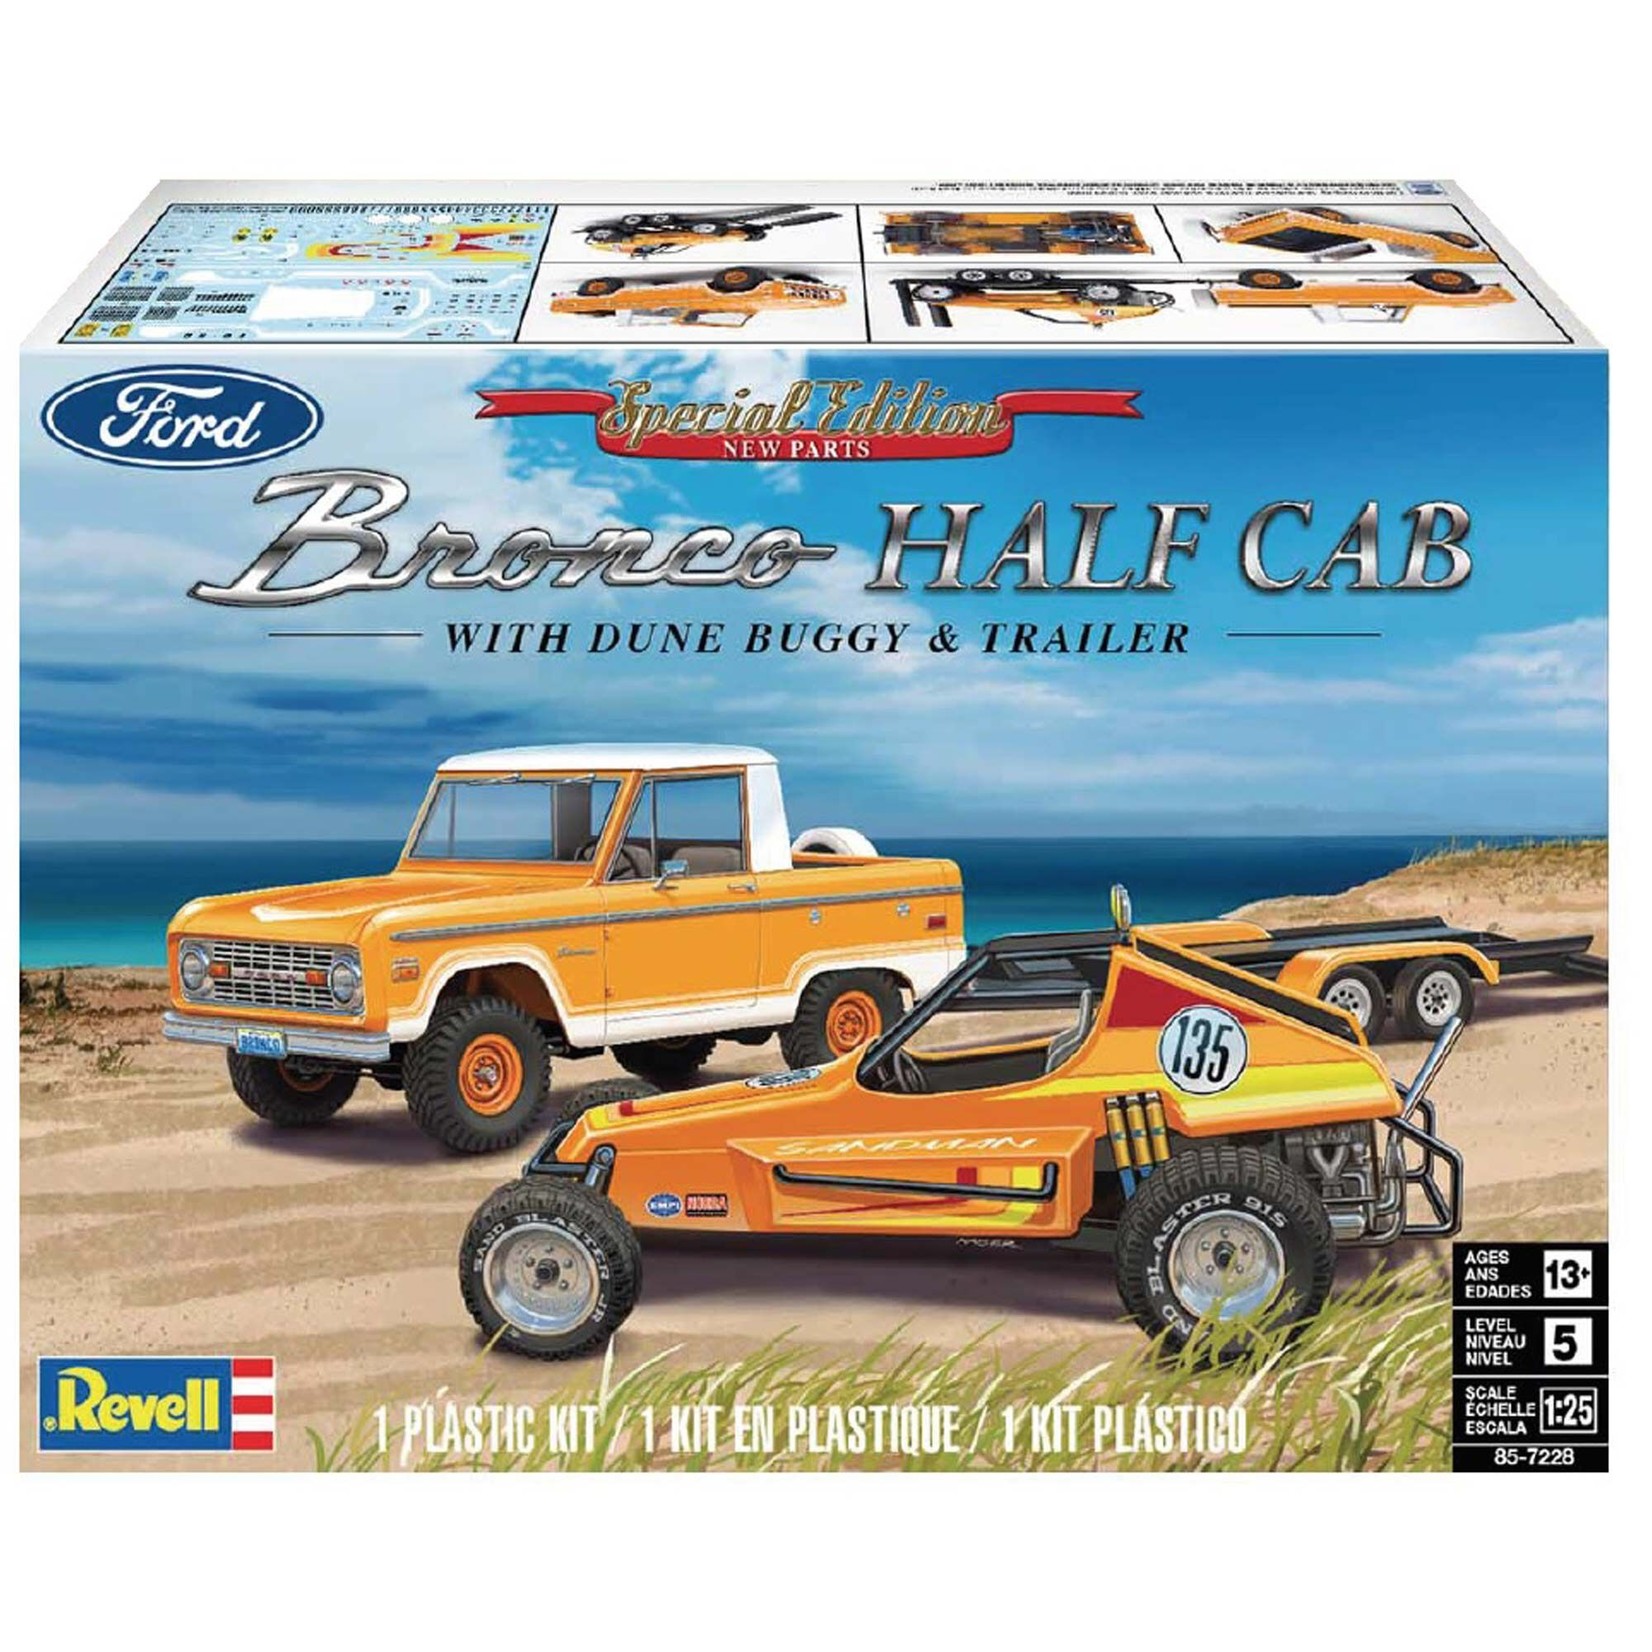 Revell-Monogram 1/25 Ford Bronco Half Cab with Dune Buggy & Trailer